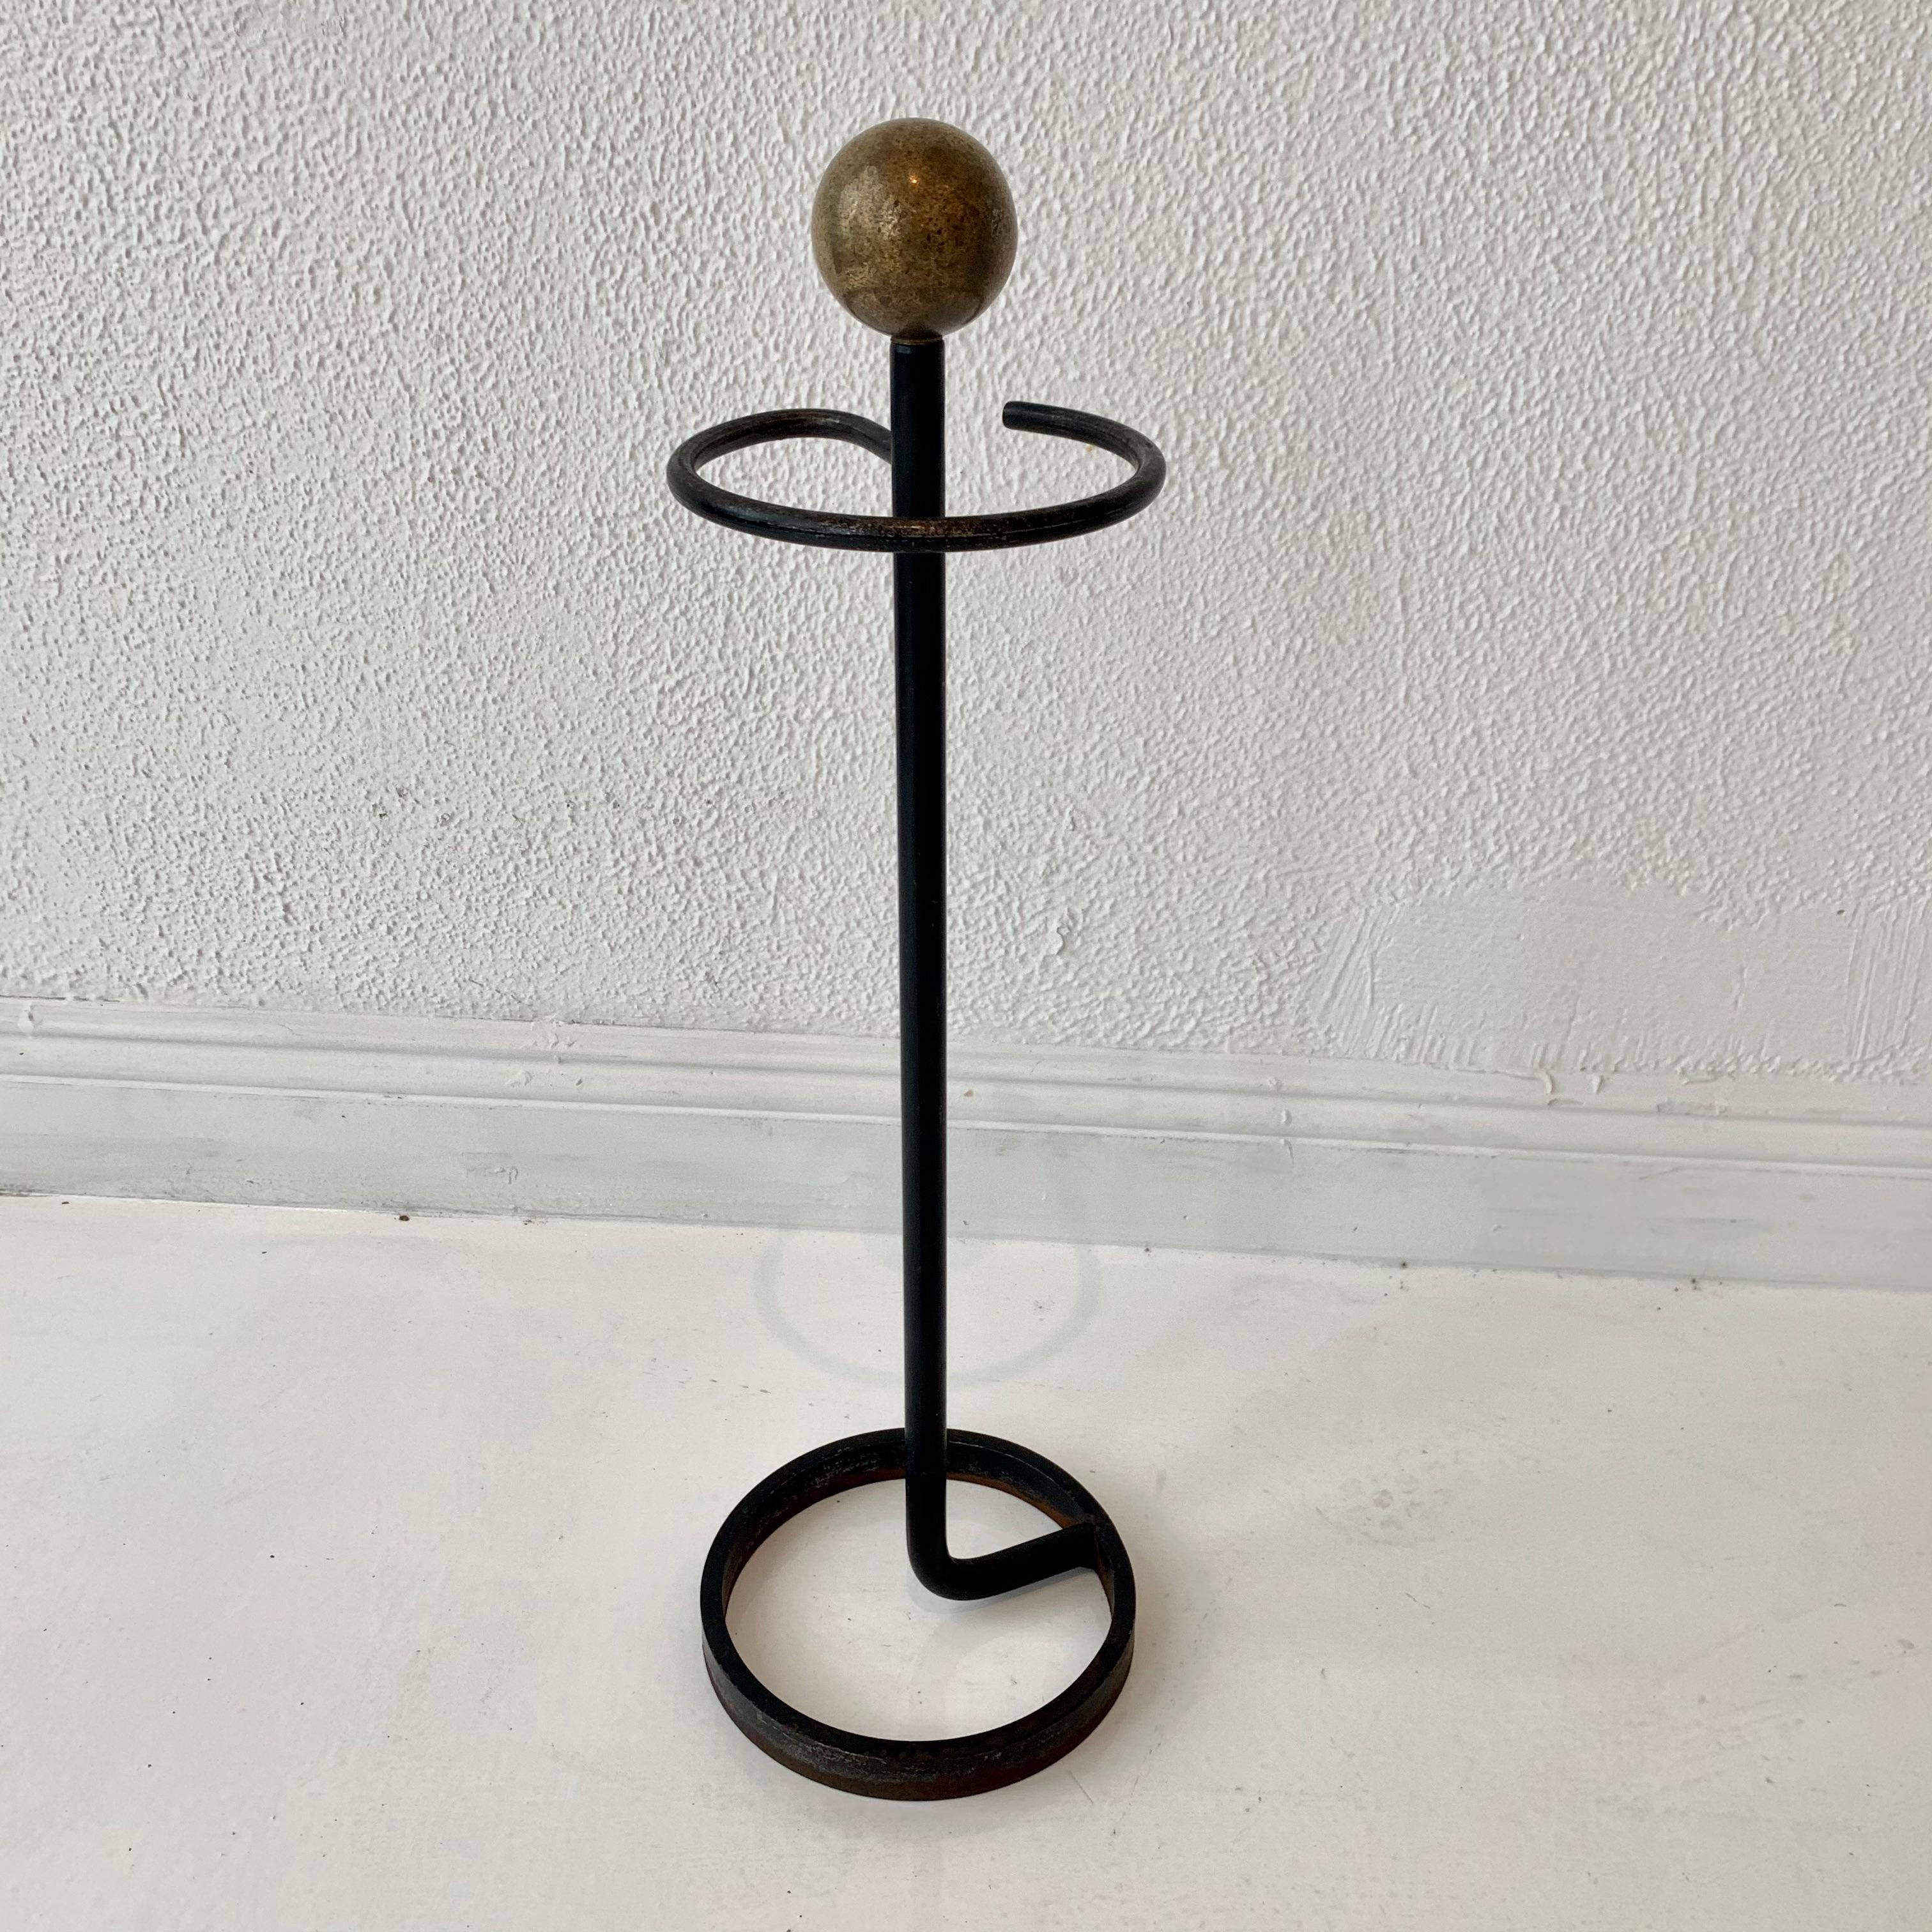 Handsome brass and iron umbrella stand. Circular iron base with inset iron pole. Brass ball top. Circular iron ring to hold umbrellas. Excellent patina. Great vintage condition.